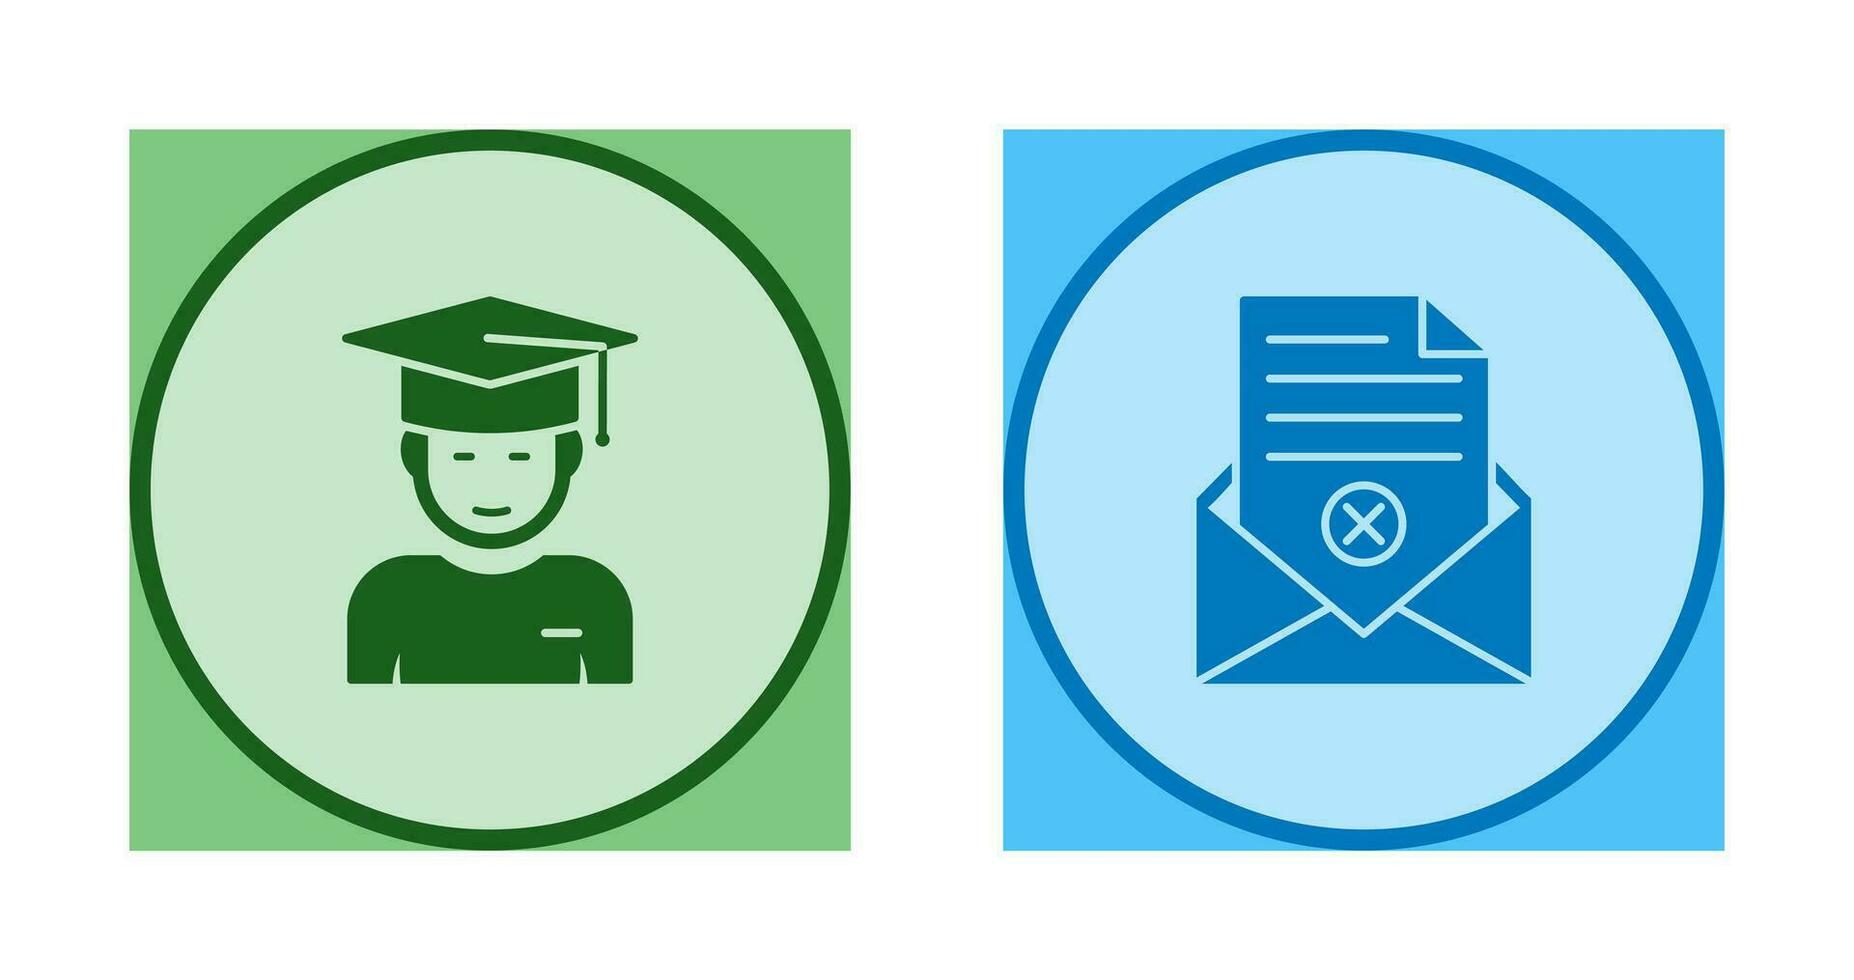 Graduate Student and Rejection Of A Letter Icon vector